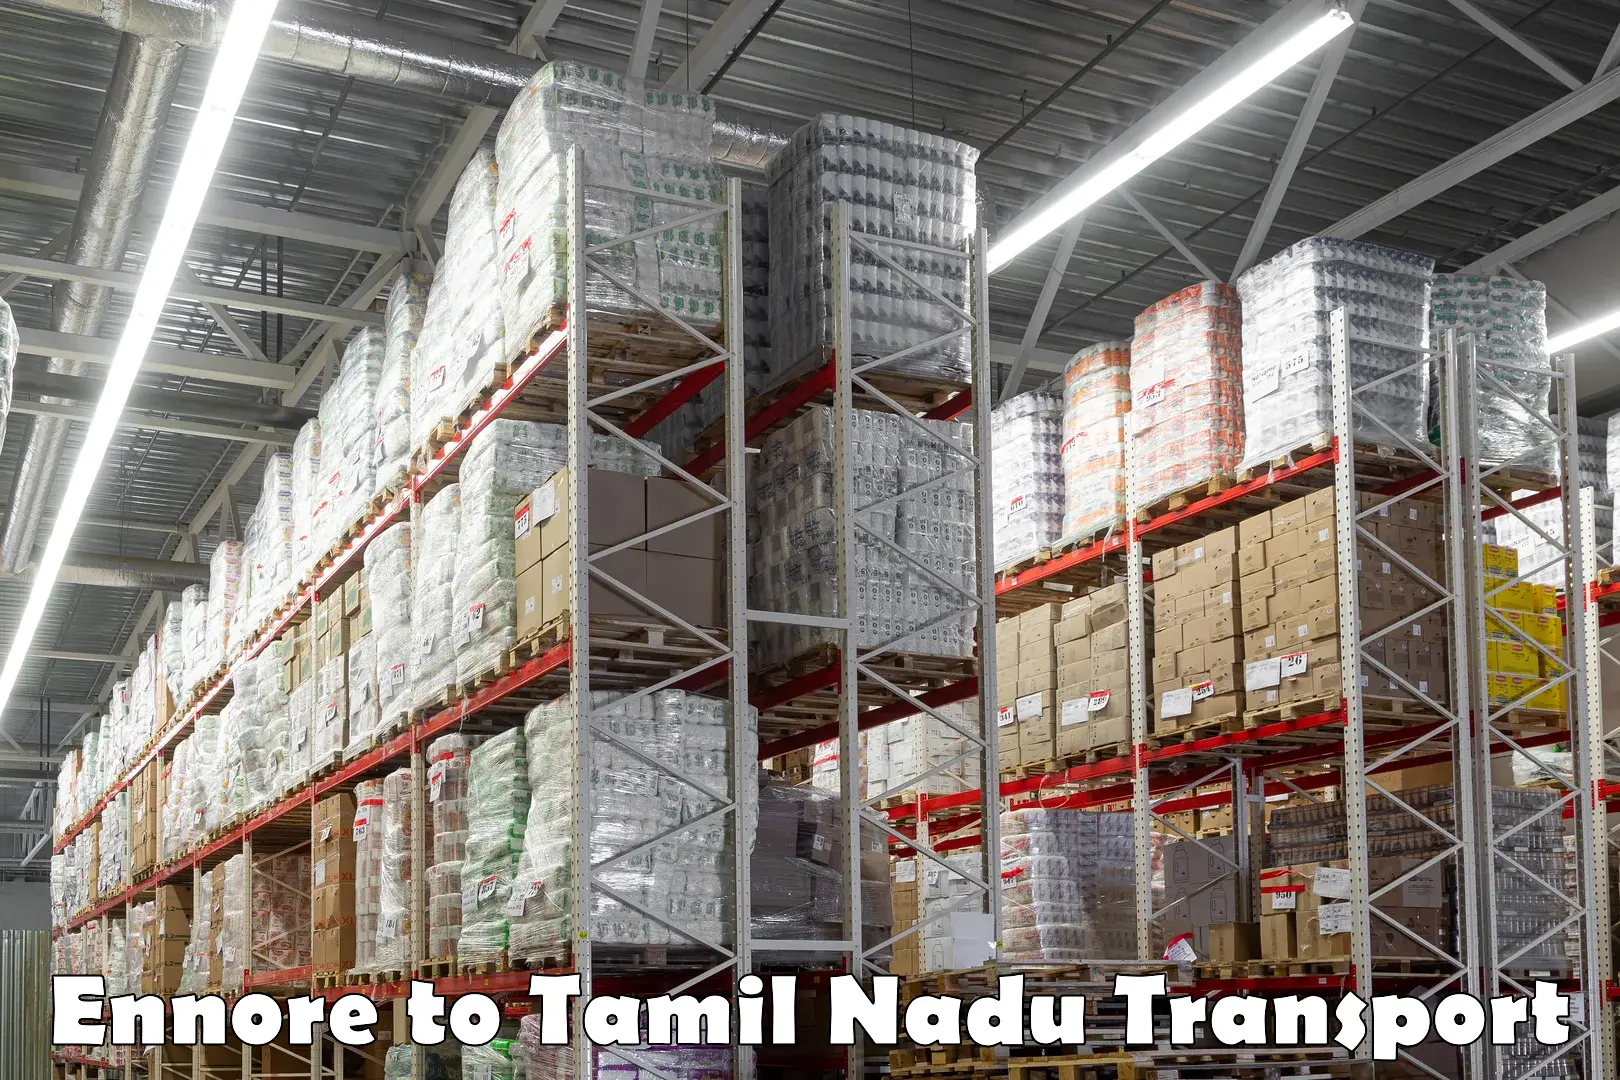 Express transport services Ennore to Tindivanam